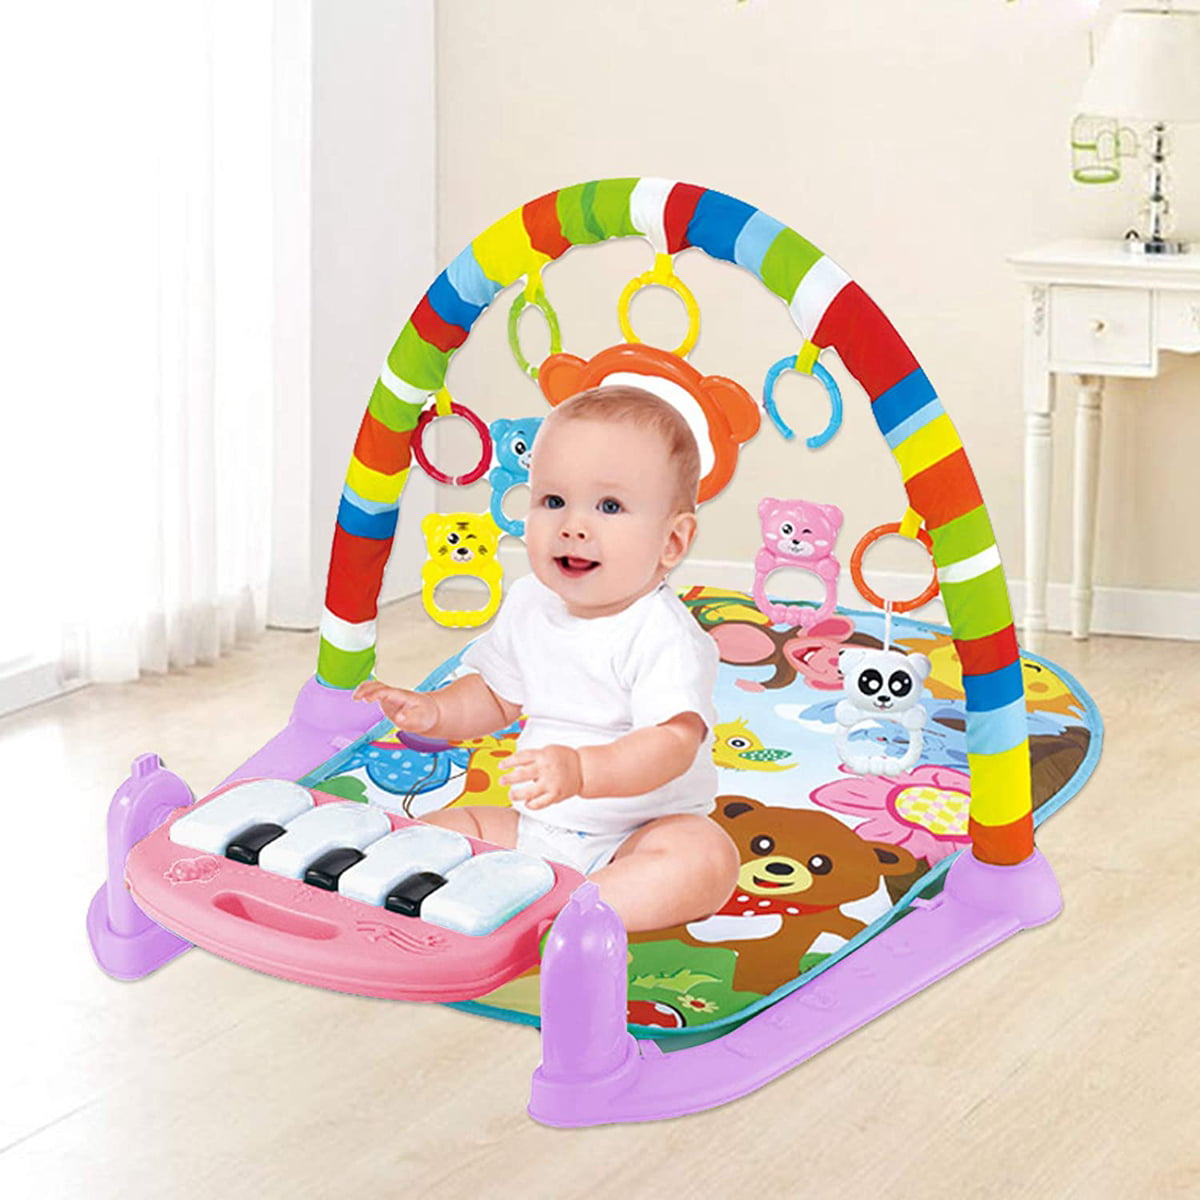 Baby Gym Activity Center with Colorful Baby Toys Kick and Play Piano Musical Toys for 0 to 3 6 9 12 Months Baby Play Mat Activity Gym with Music and Lights Christmas Gift Baby Shower 